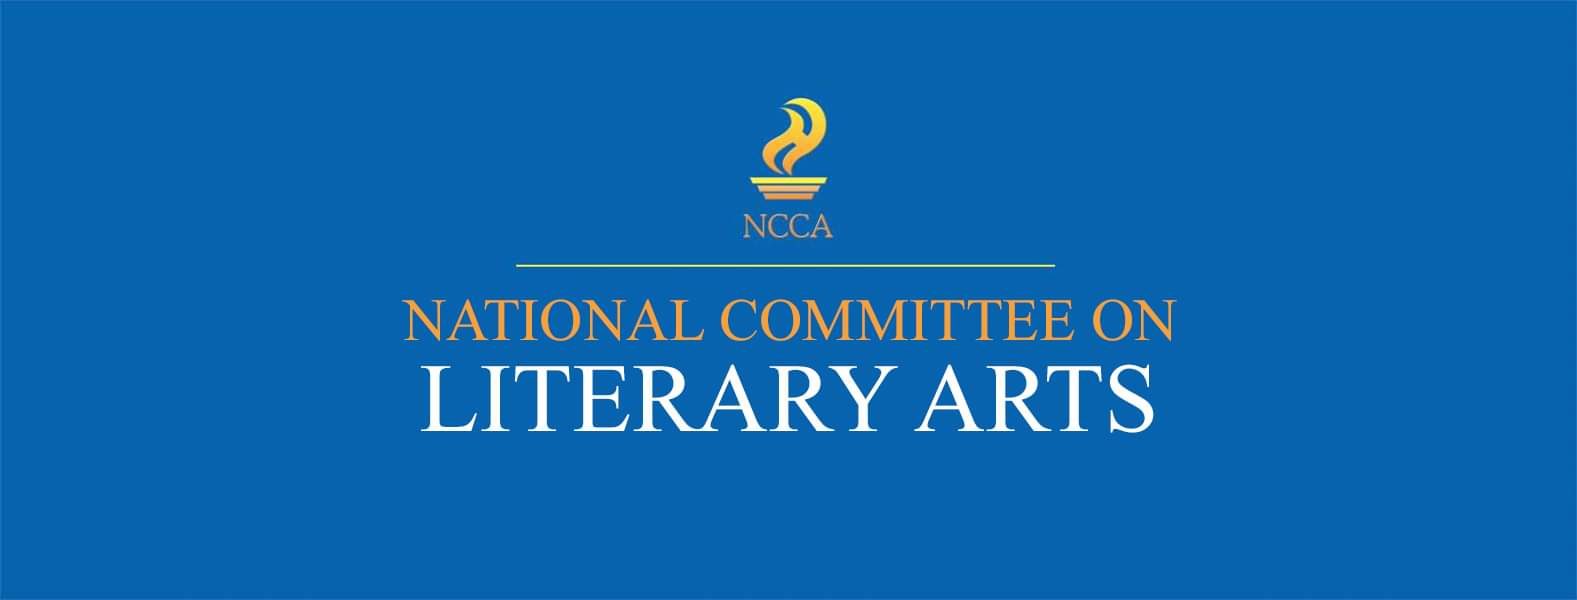 After plagiarism issues, NCLA to release final list of 2022 GBL literary contest winners